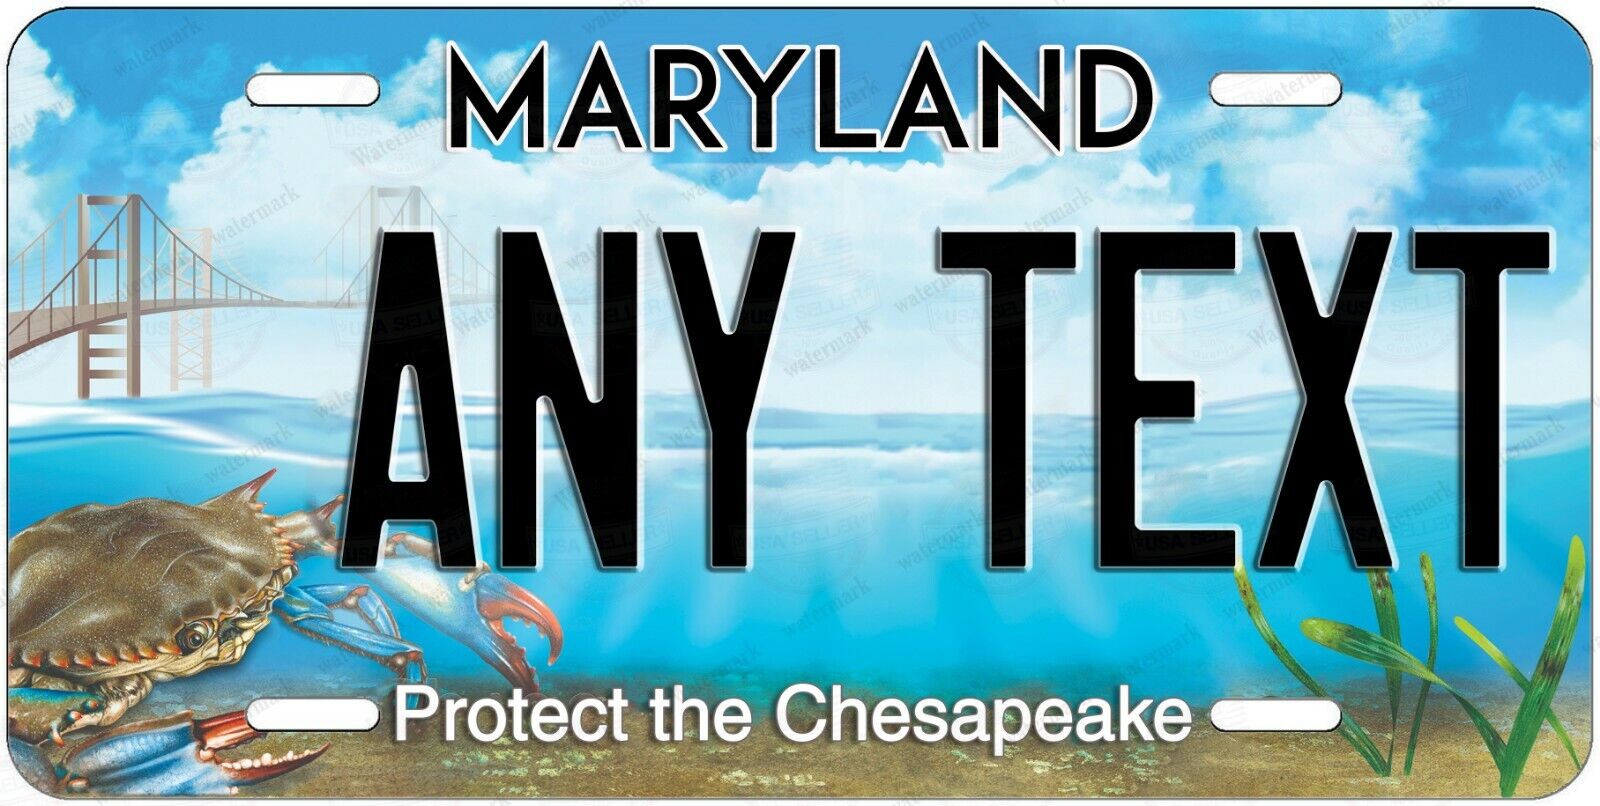 MARYLAND Chesapeake Bay License Plate Novelty Personalized Any Text for Auto ATV